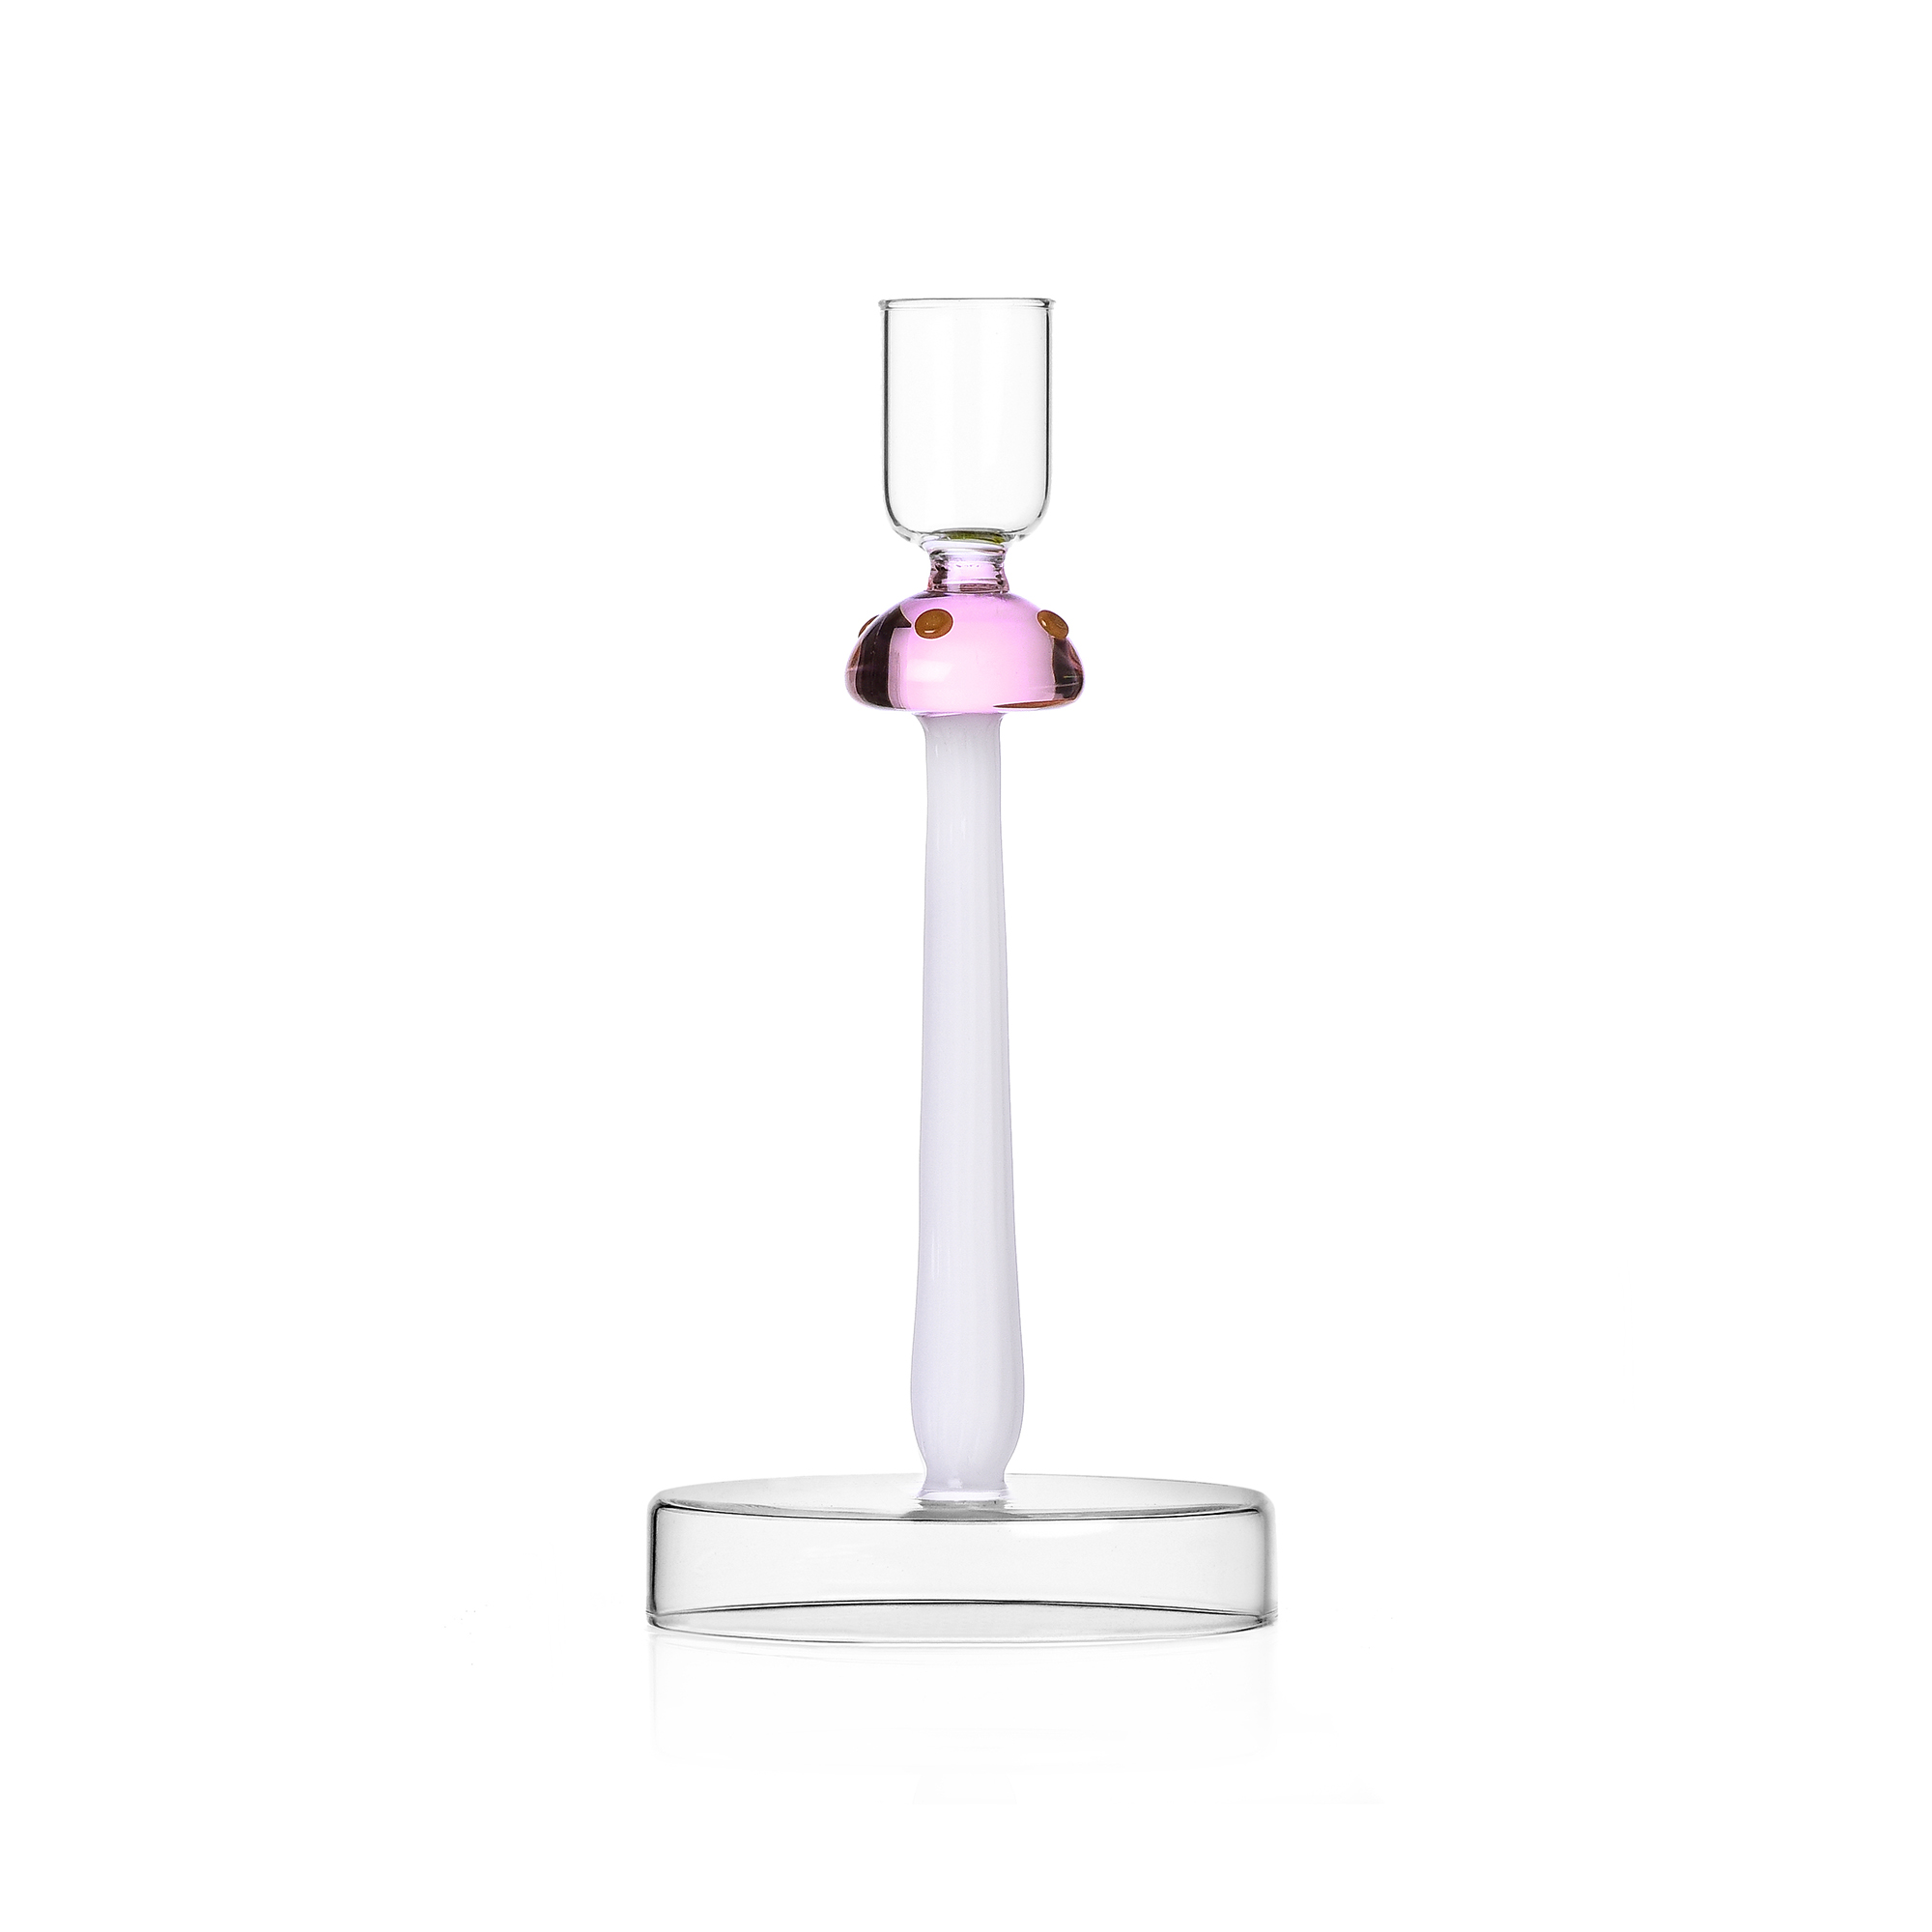 Candlestick Collection Alice Pink Mushroom